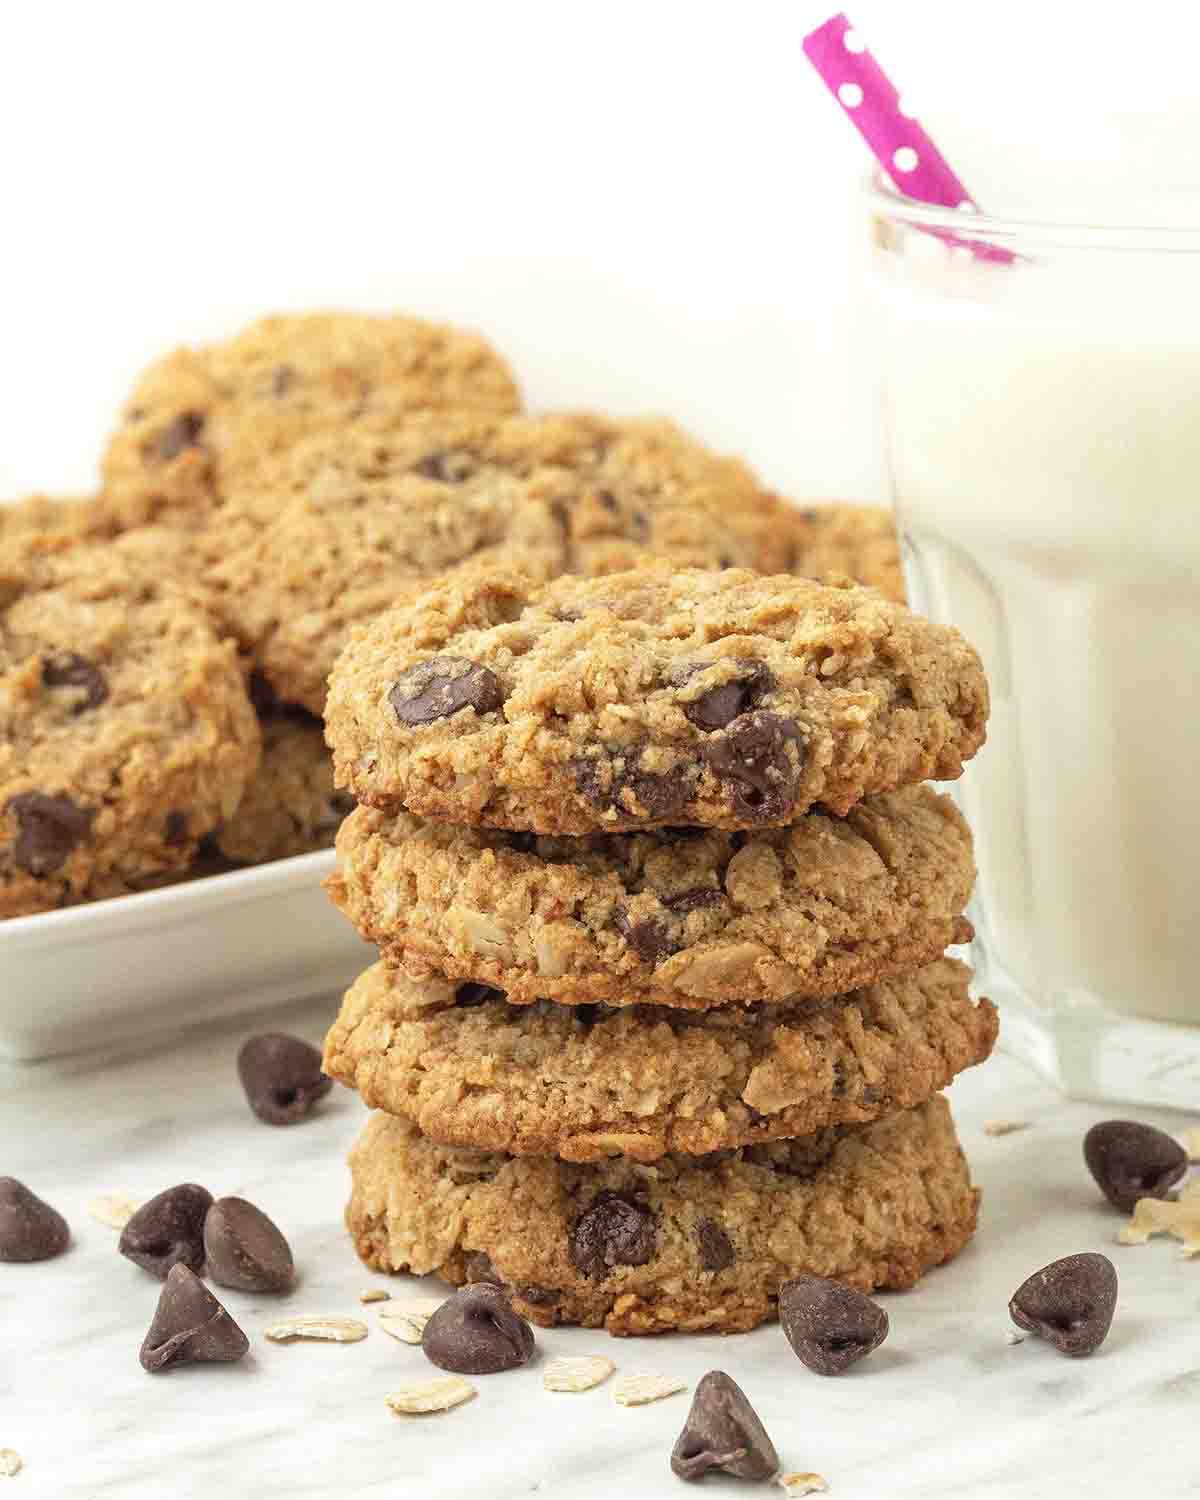 A stack of four vegan almond flour oatmeal chocolate chip cookies on a table, more cookies sit behind them.